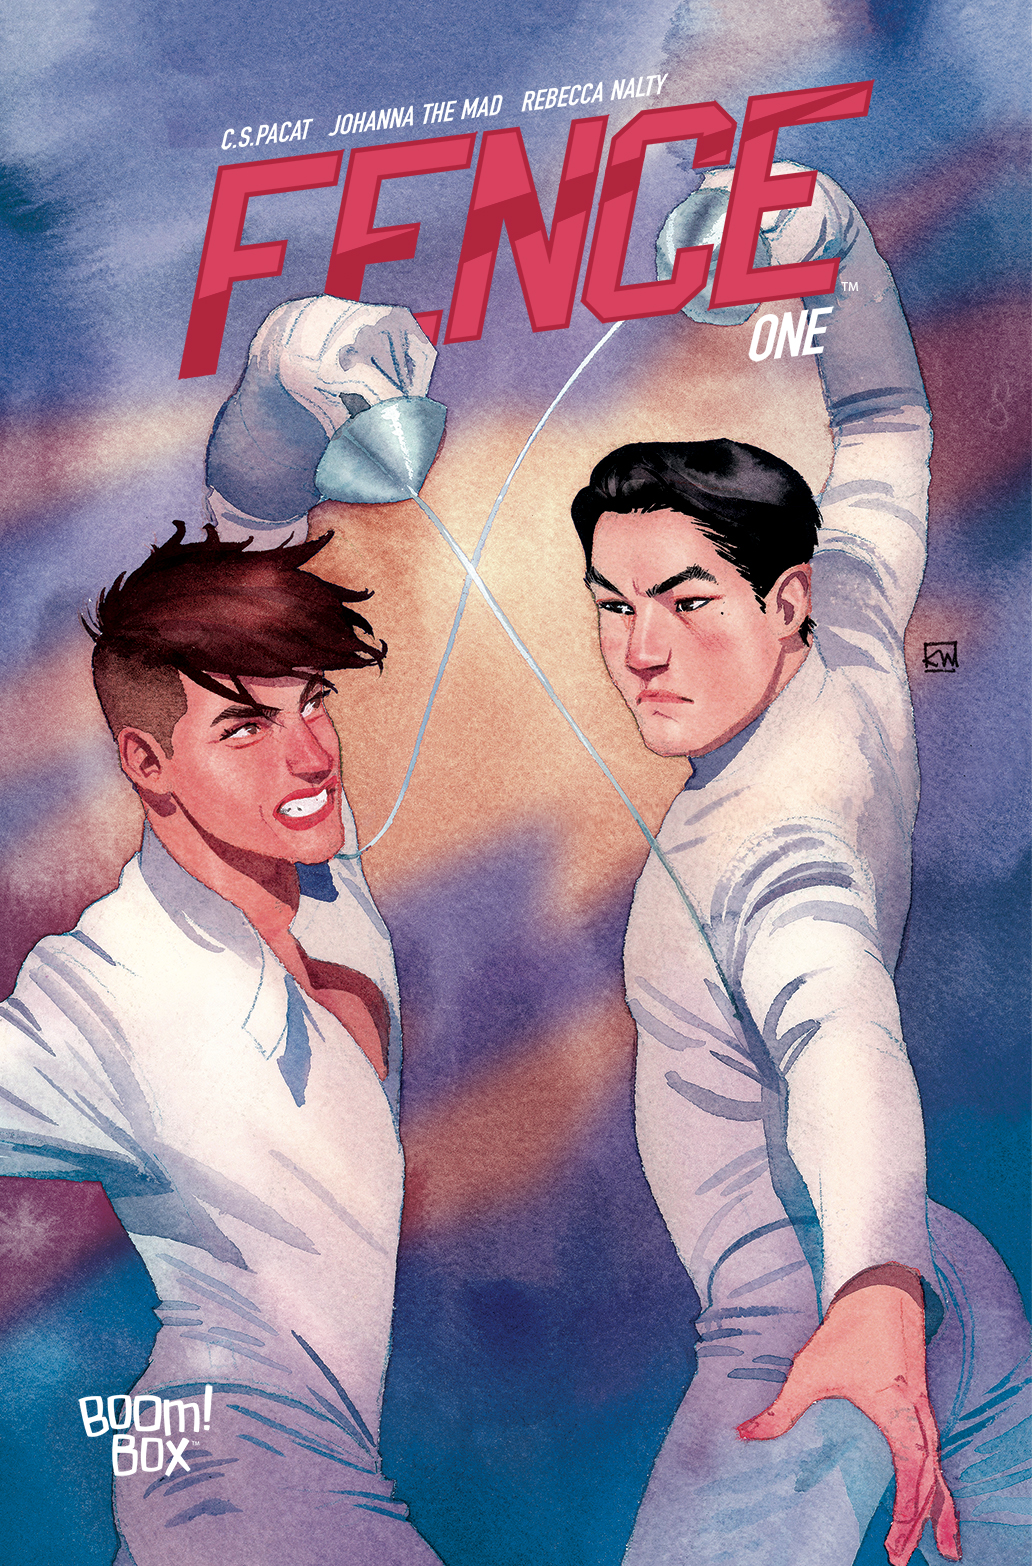 Fence #1 variant cover by Kevin Wada.